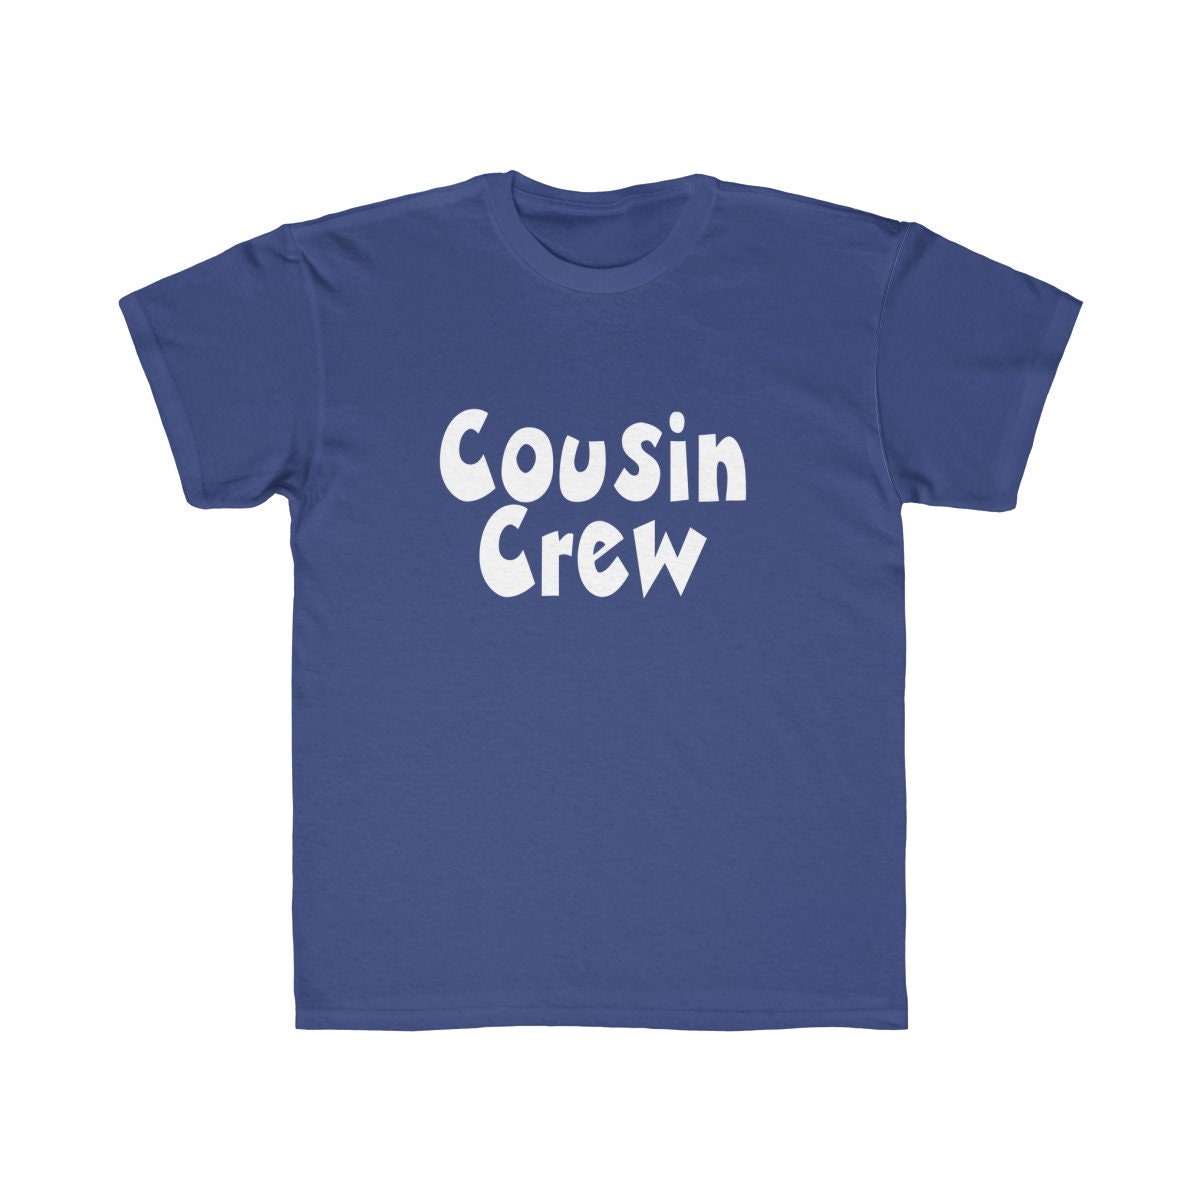 Cousin Crew kids tshirt, family tshirt, shirts for family, family group ...